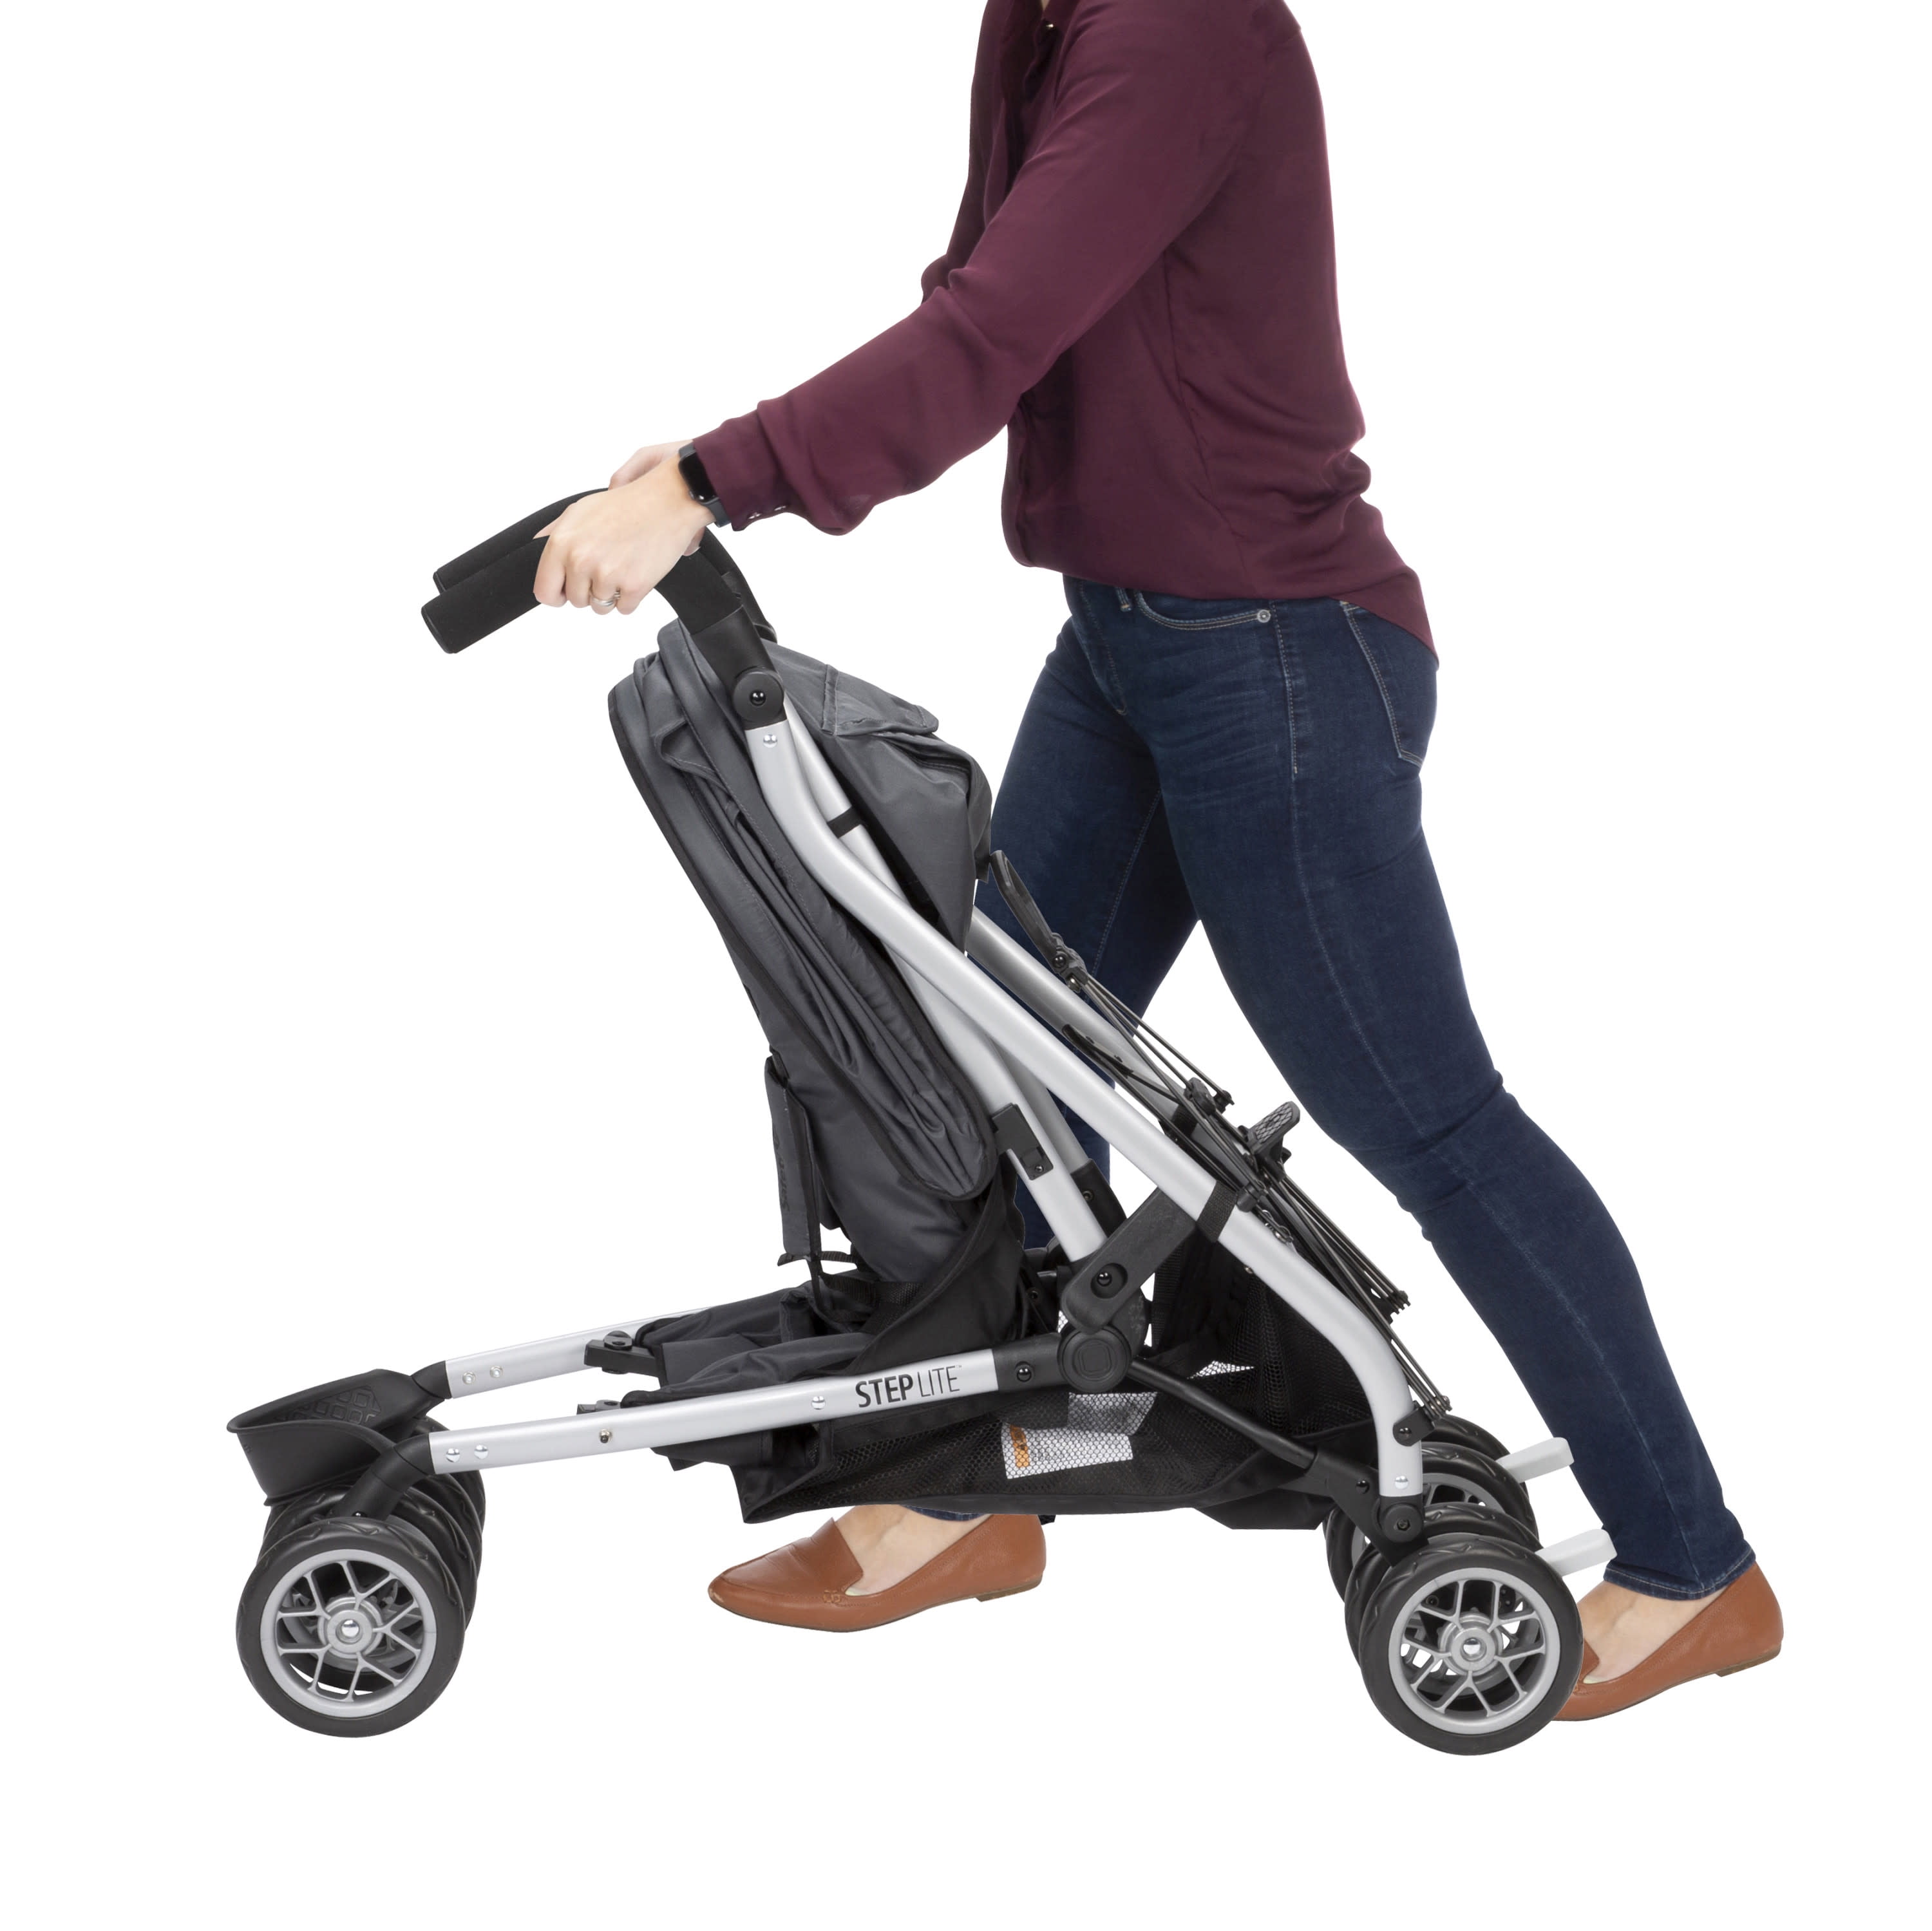 Safety 1st Step Lite Stroller Review - Consumer Reports